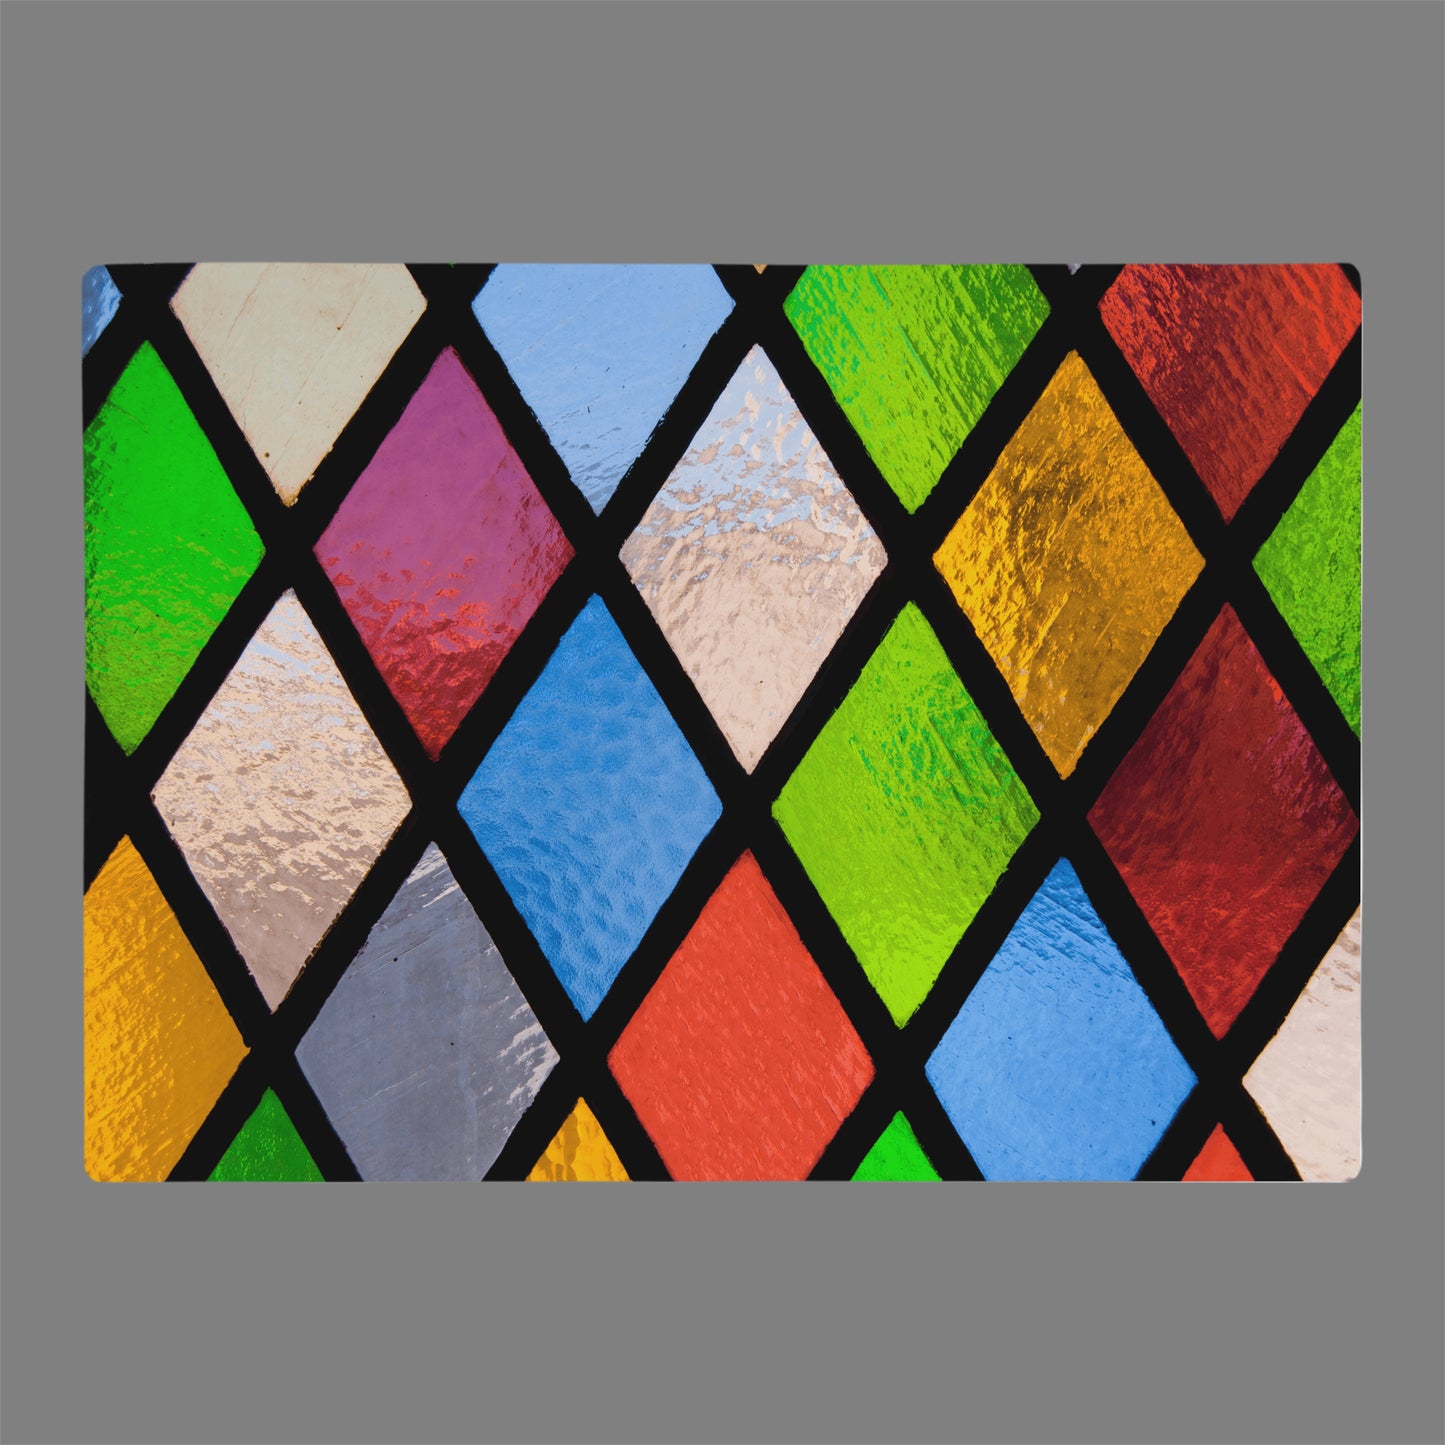 Diamond stain glass design printed on a glass cutting board great gift idea